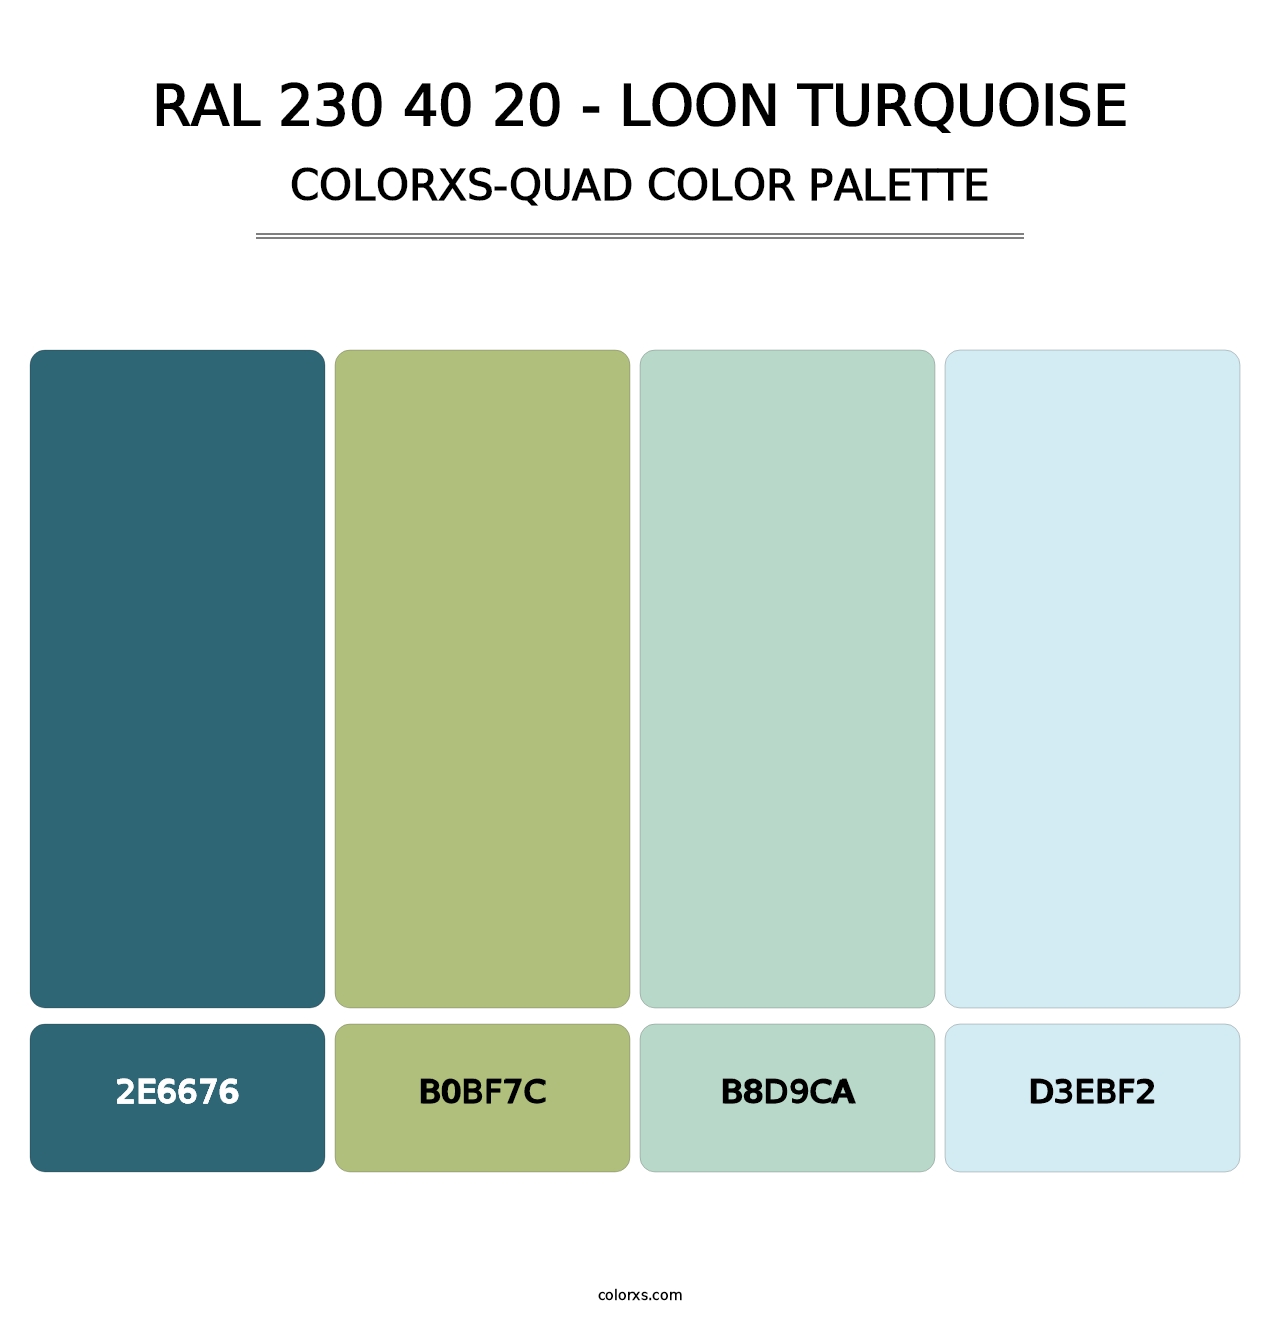 RAL 230 40 20 - Loon Turquoise - Colorxs Quad Palette